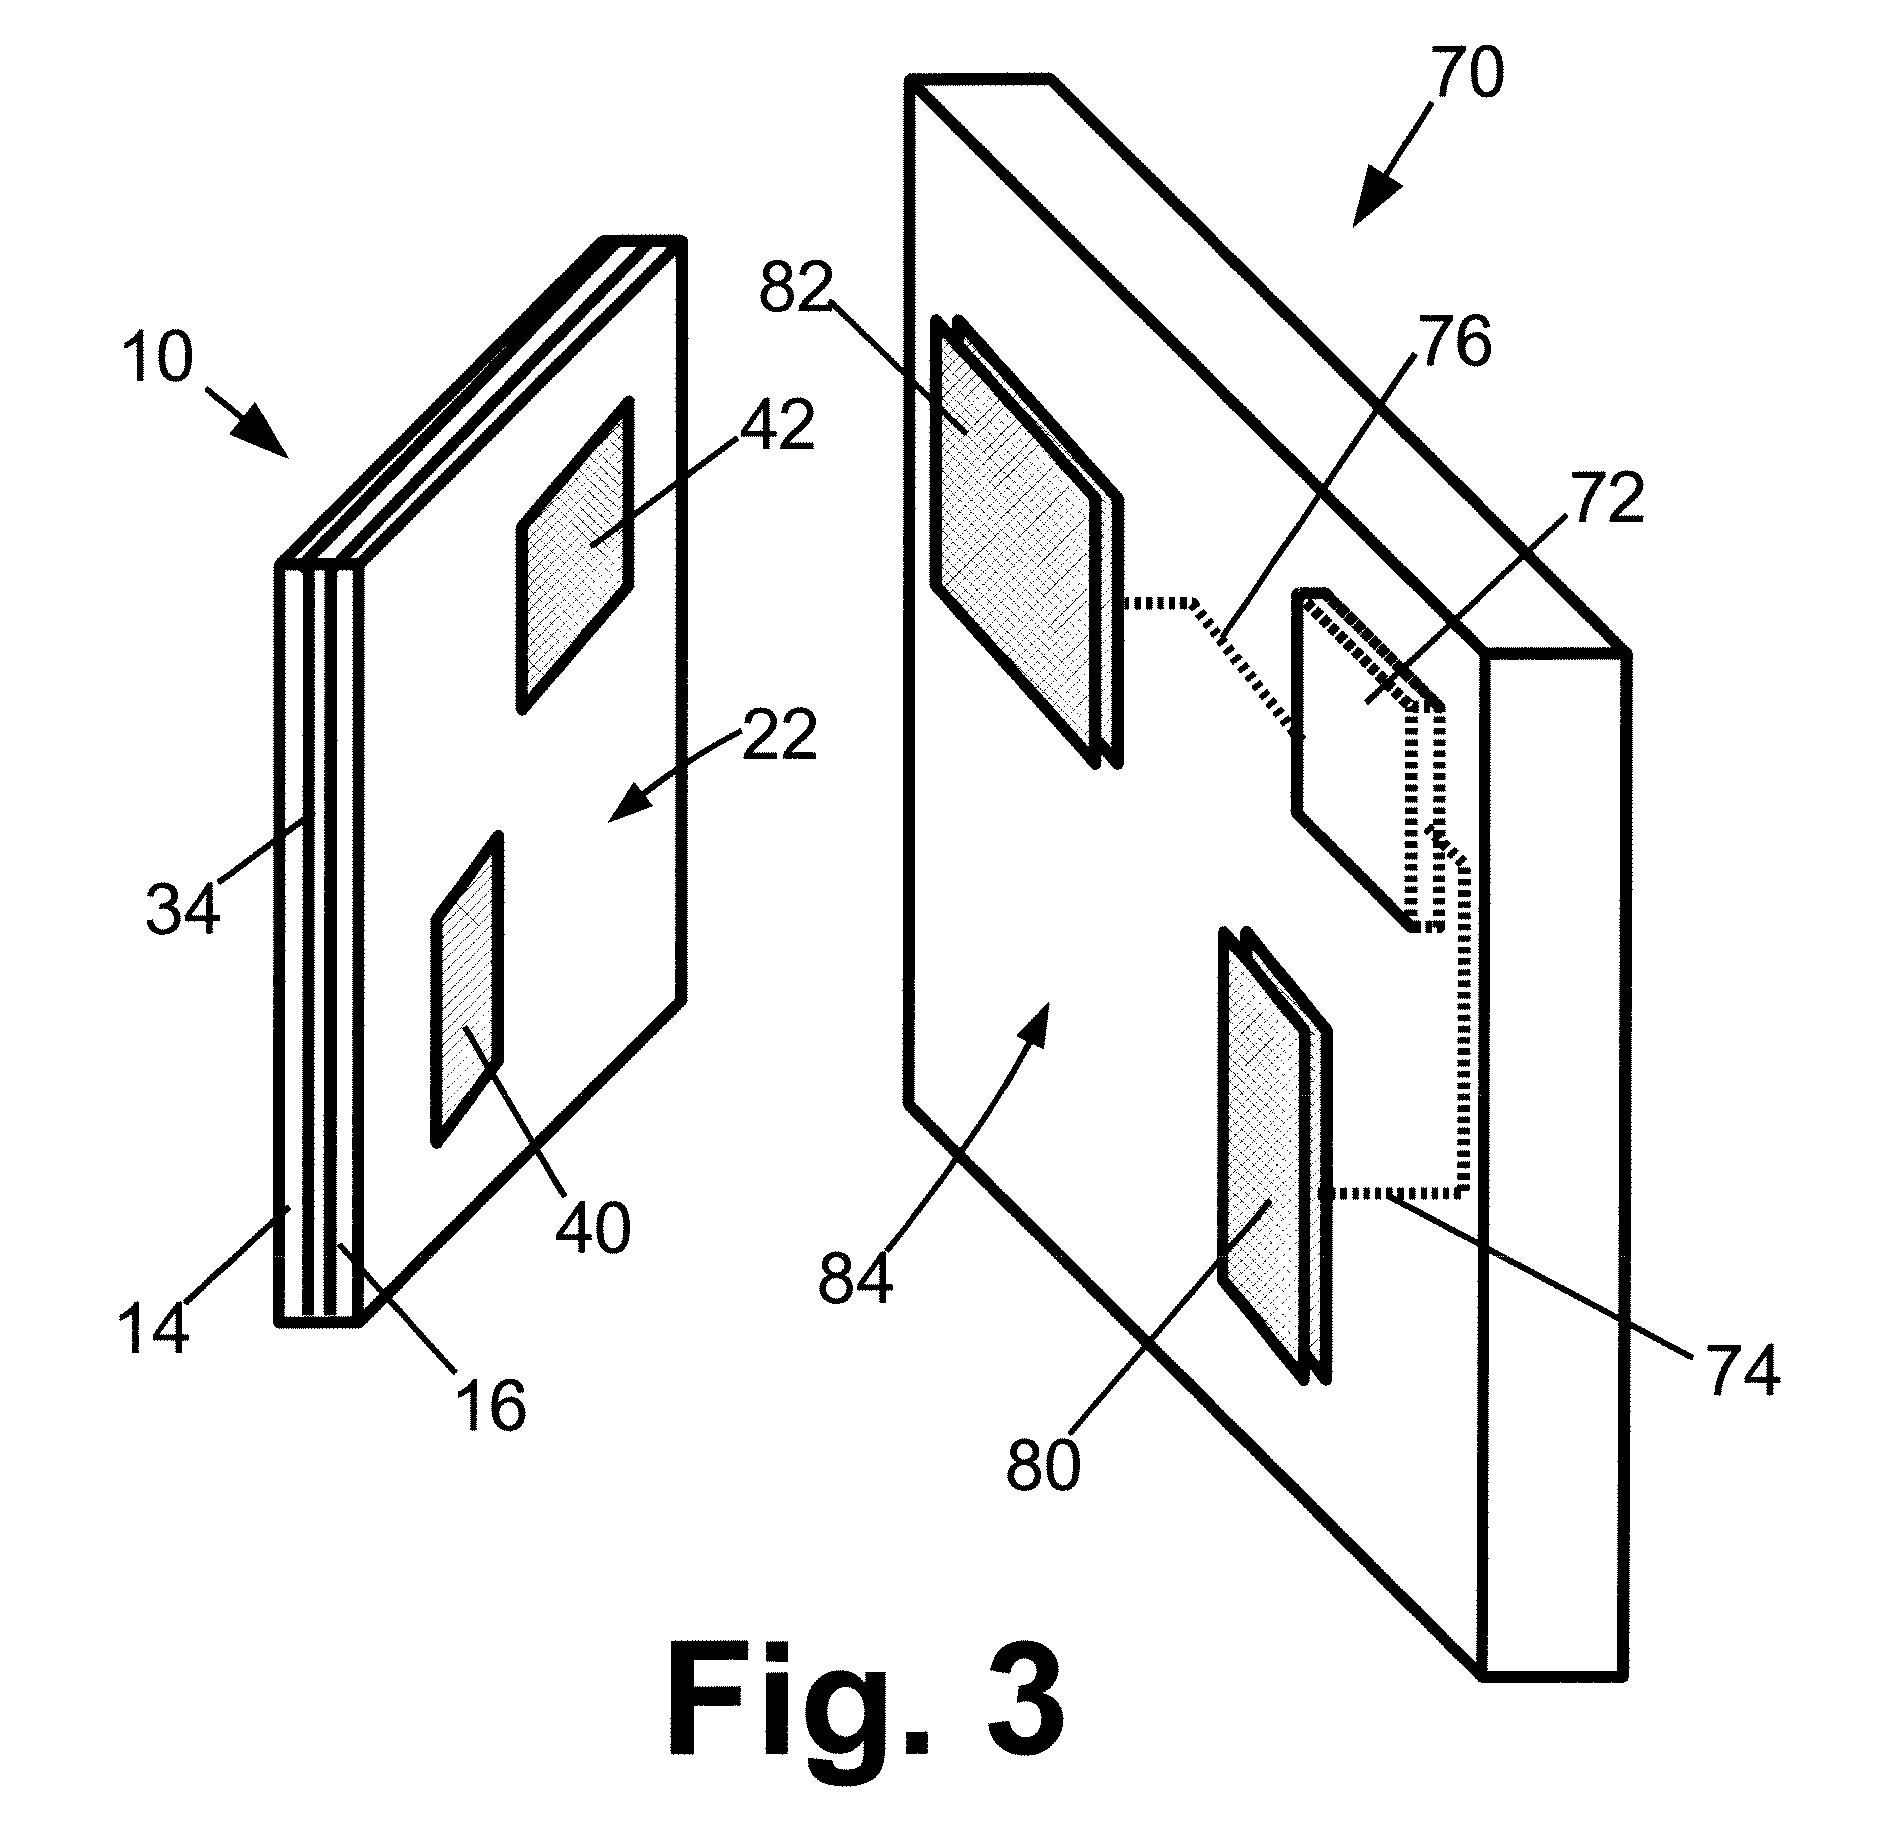 OLED lighting devices including electrodes with magnetic material